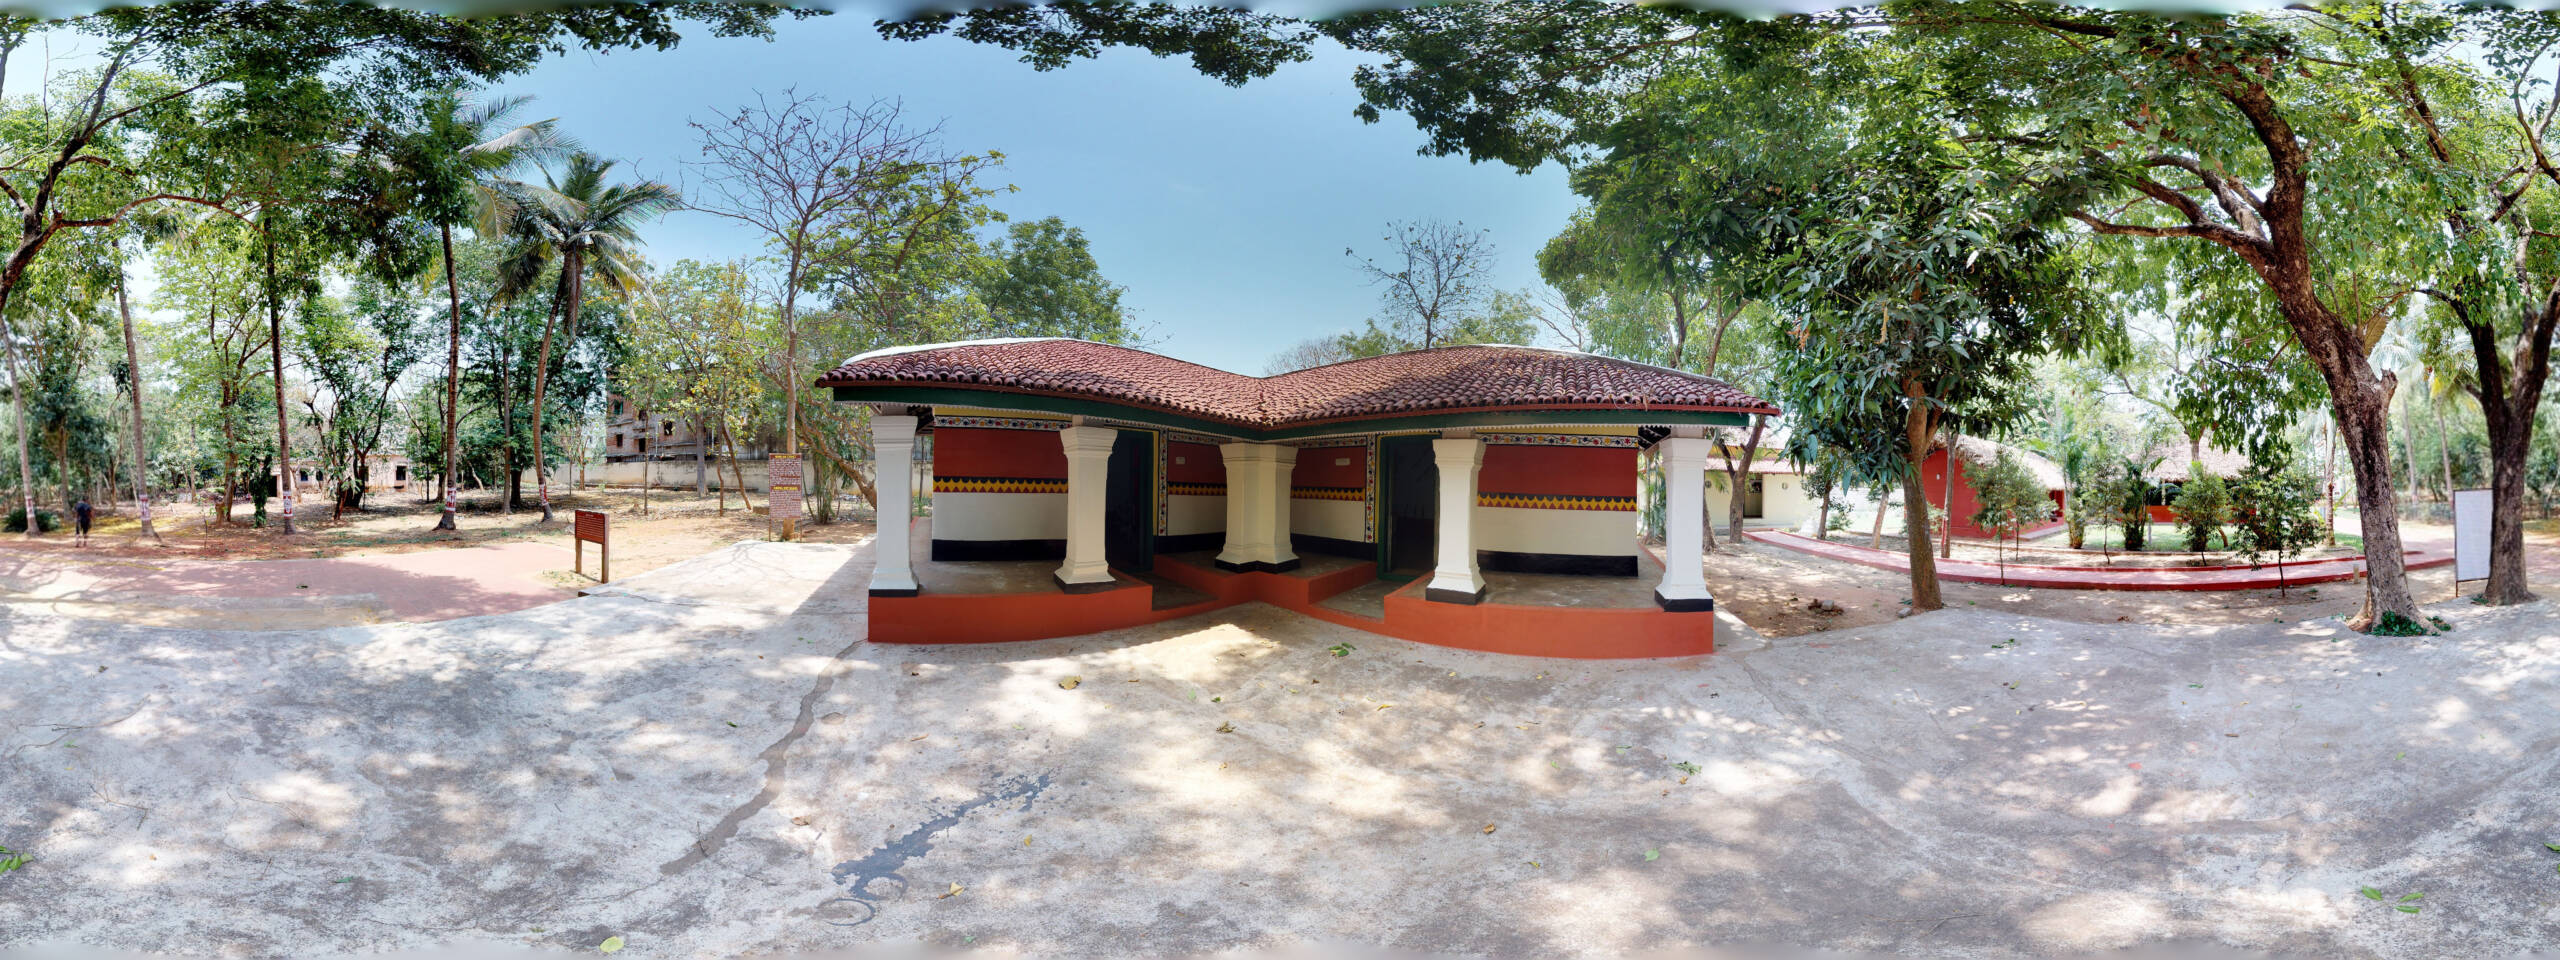 360 degree view of Santal house at Odisha State Tribal Museum